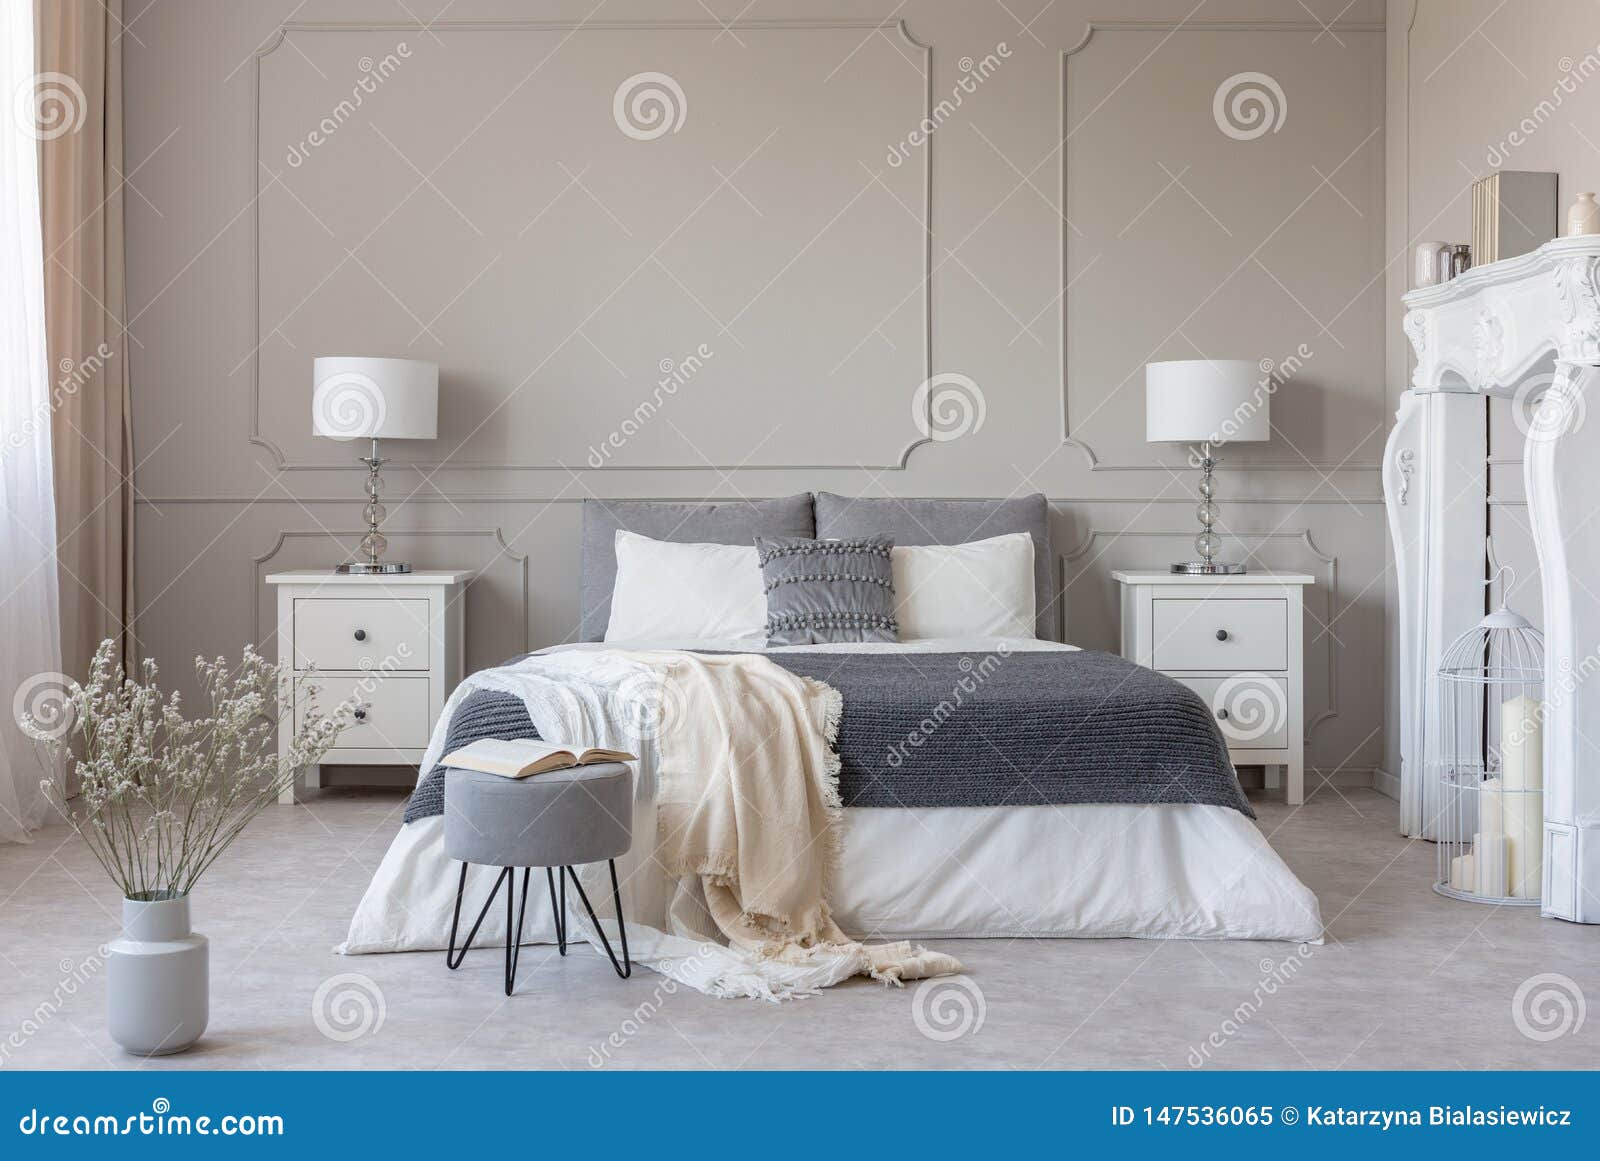 new york style bedroom interior with symmetric , copy space on empty grey wall